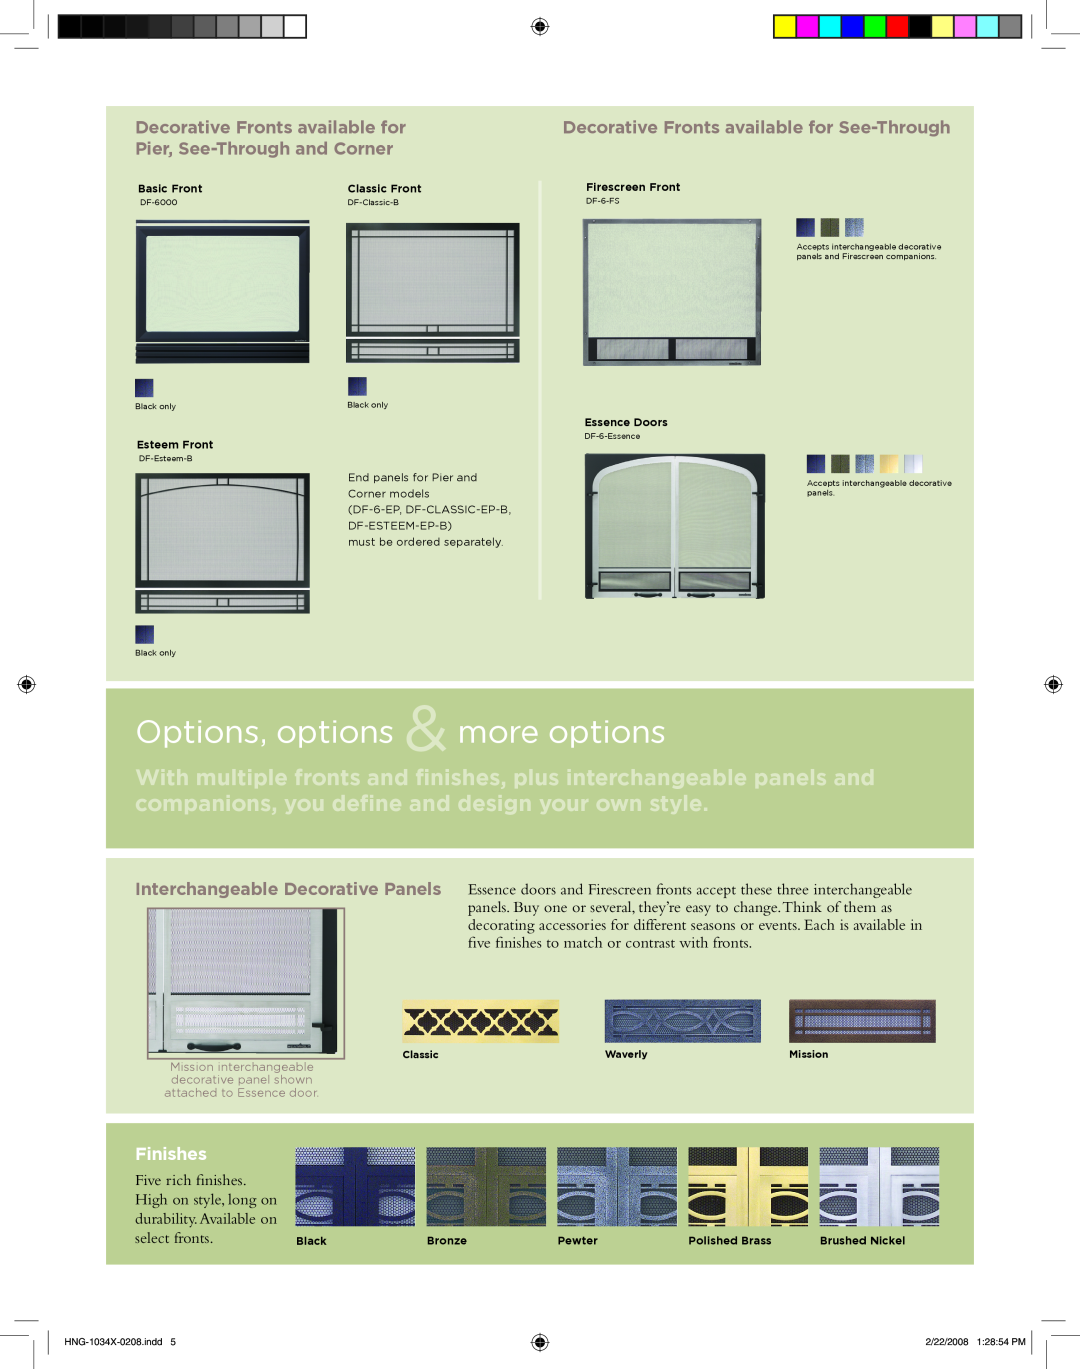 Hearth and Home Technologies GATEWAY manual Options, options & more options, Decorative Fronts available for See-Through 